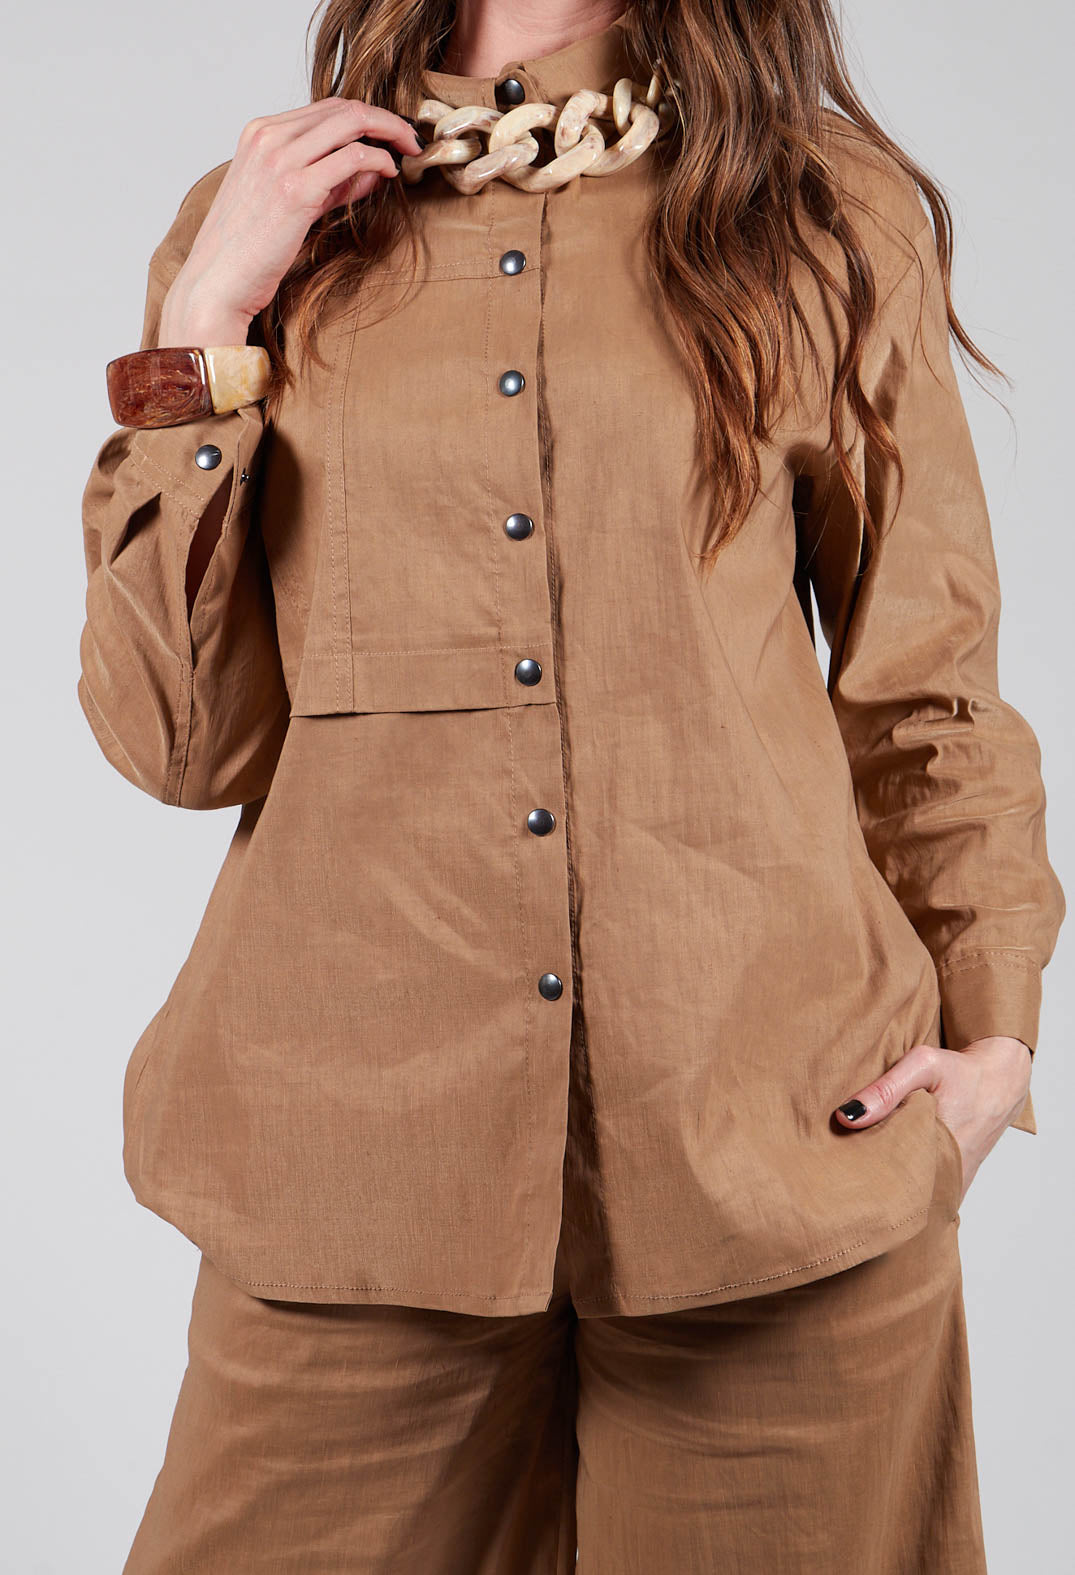 Collared Utility Shirt in Beige